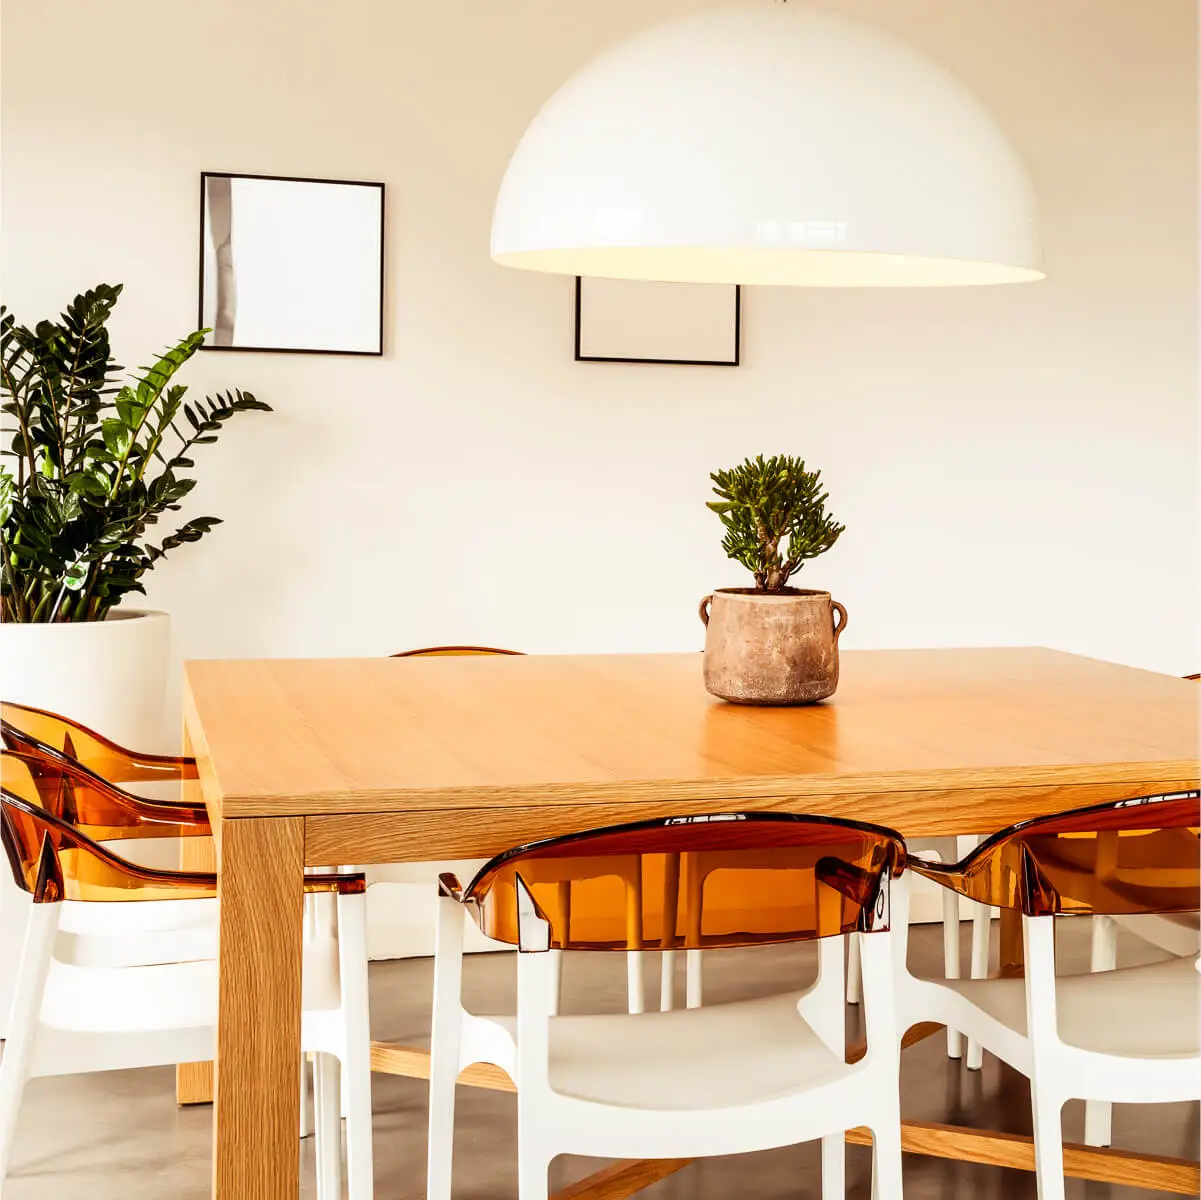 Large domed lamp shade hangs over a wooden dining room table with chairs surrounding it. Plants are dotted around the room.